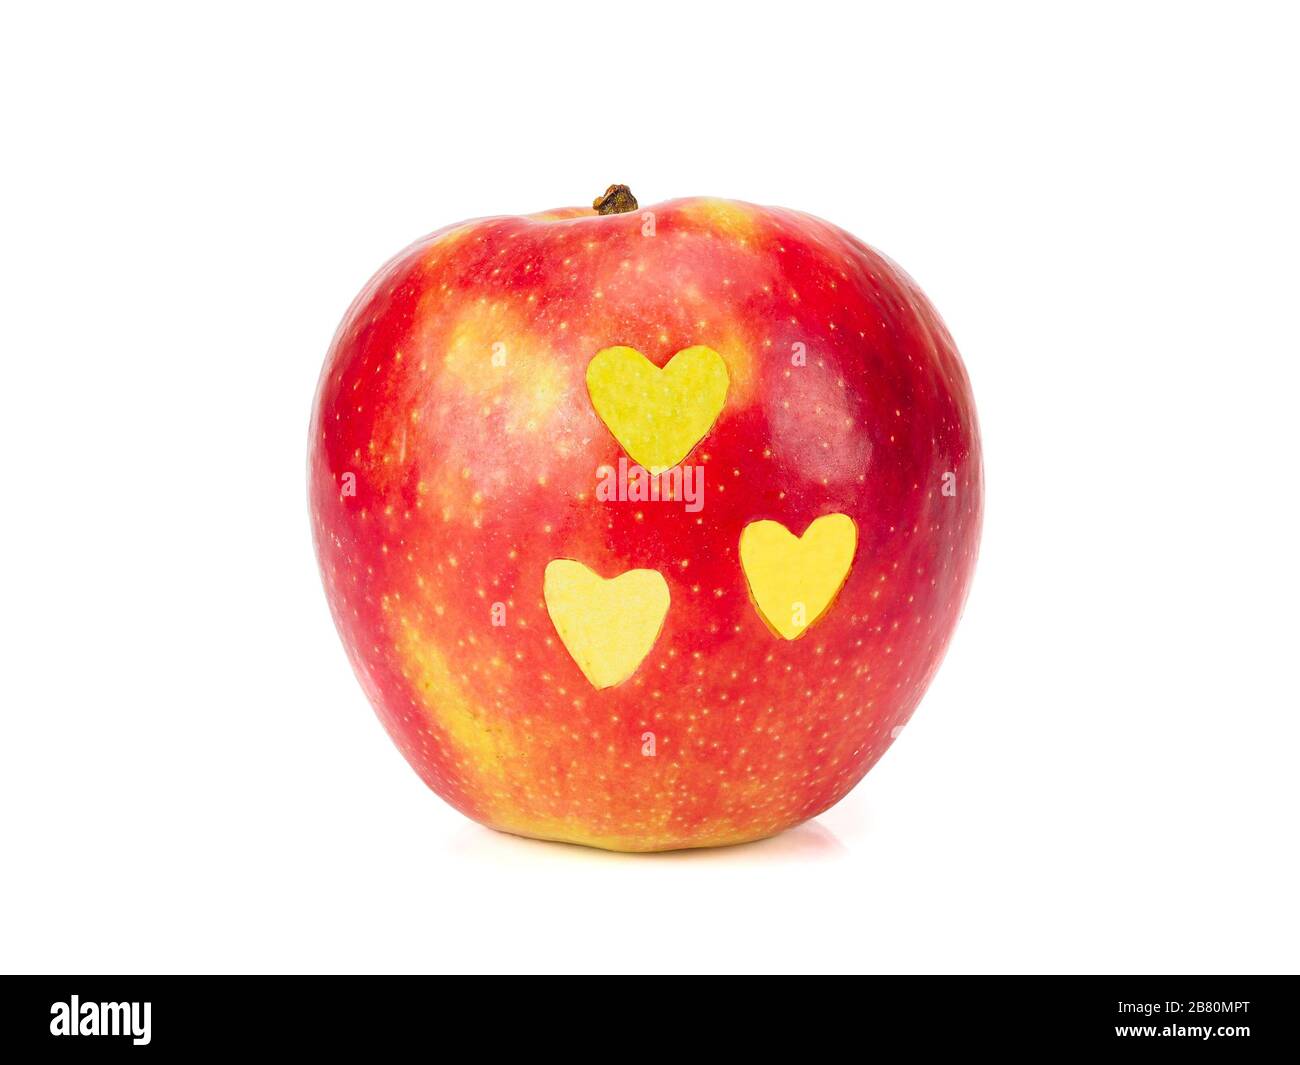 Fresh red apple with yellow hearts on its side isolated on white Stock Photo